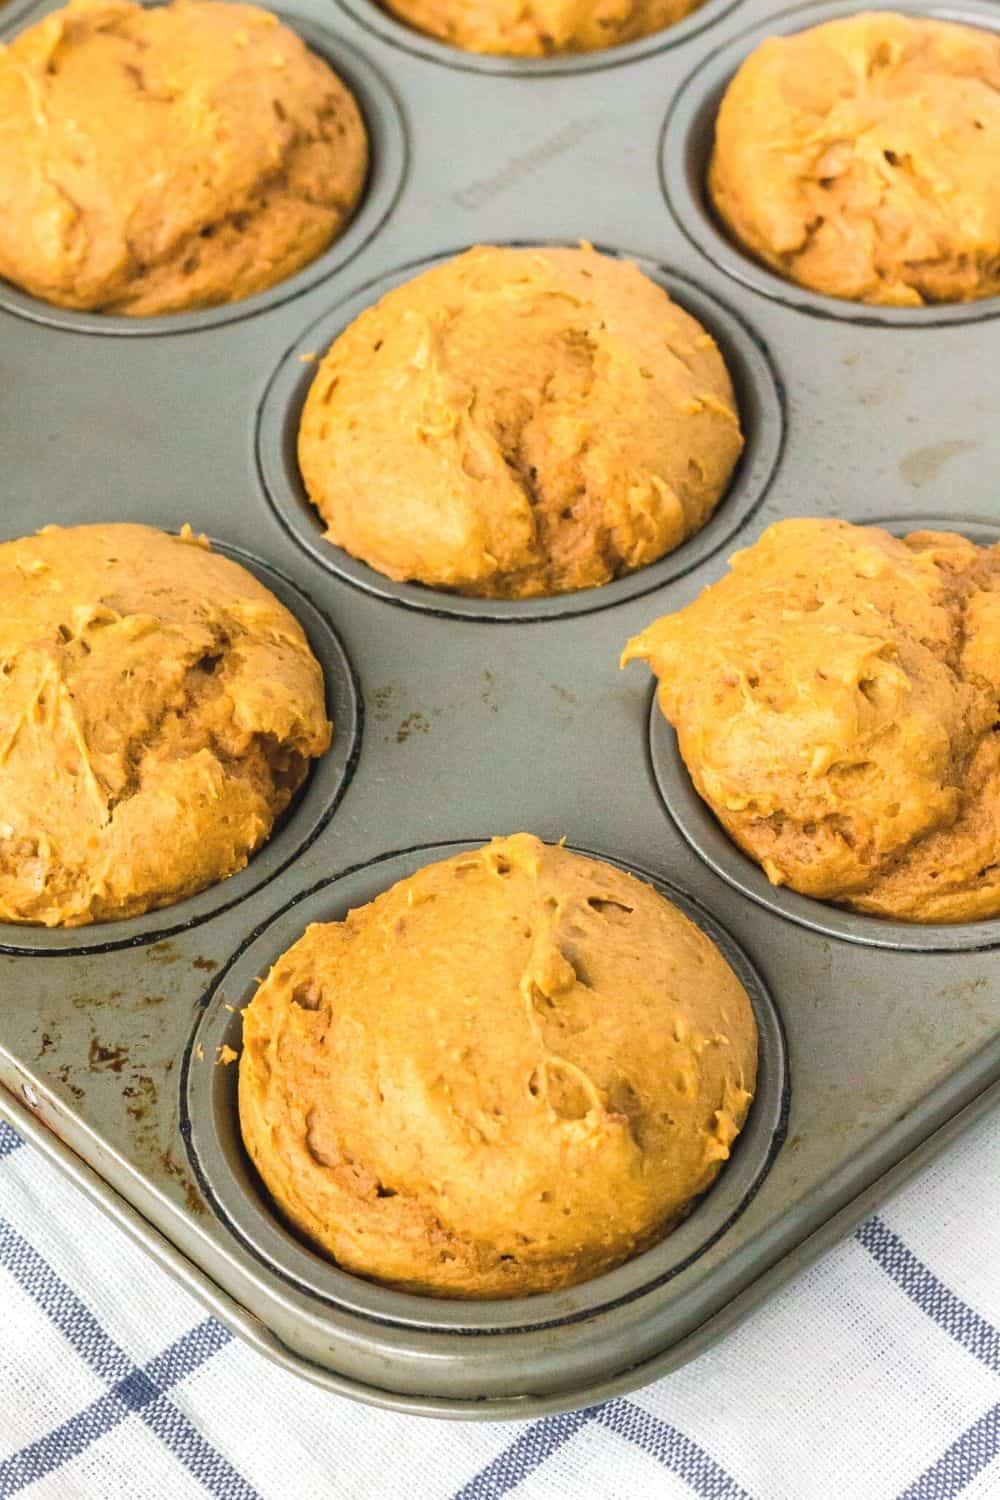 freshly baked pumpkin muffins, made with spice cake mix, still in the pan.